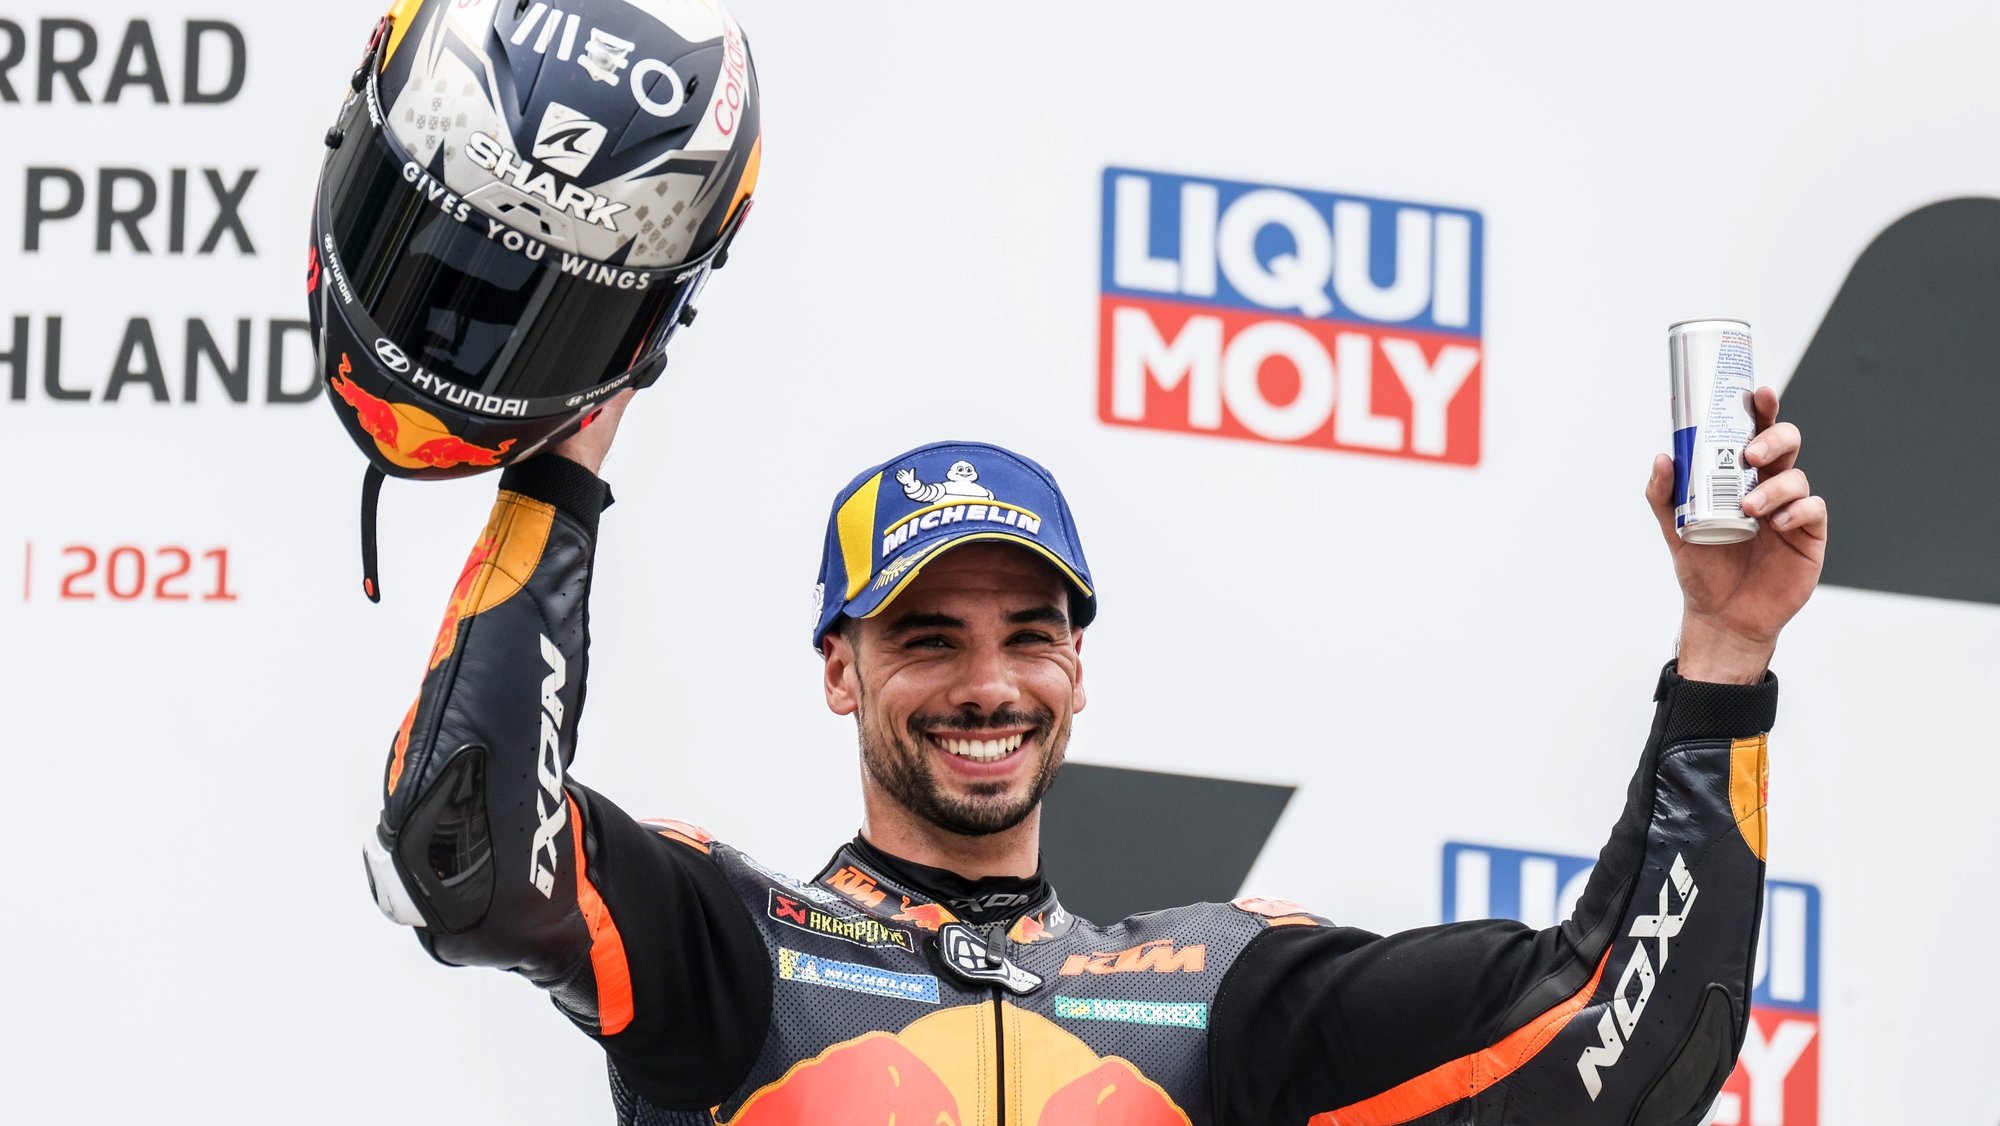 epa09288237 Portuguese MotoGP rider Miguel Oliveira of the Red Bull KTM Factory Racing team celebrates on the podium after taking the second place in the Motorcycling Grand Prix of Germany at the Sachsenring racing circuit in Hohenstein-Ernstthal, Germany, 20 June 2021.  EPA/FILIP SINGER